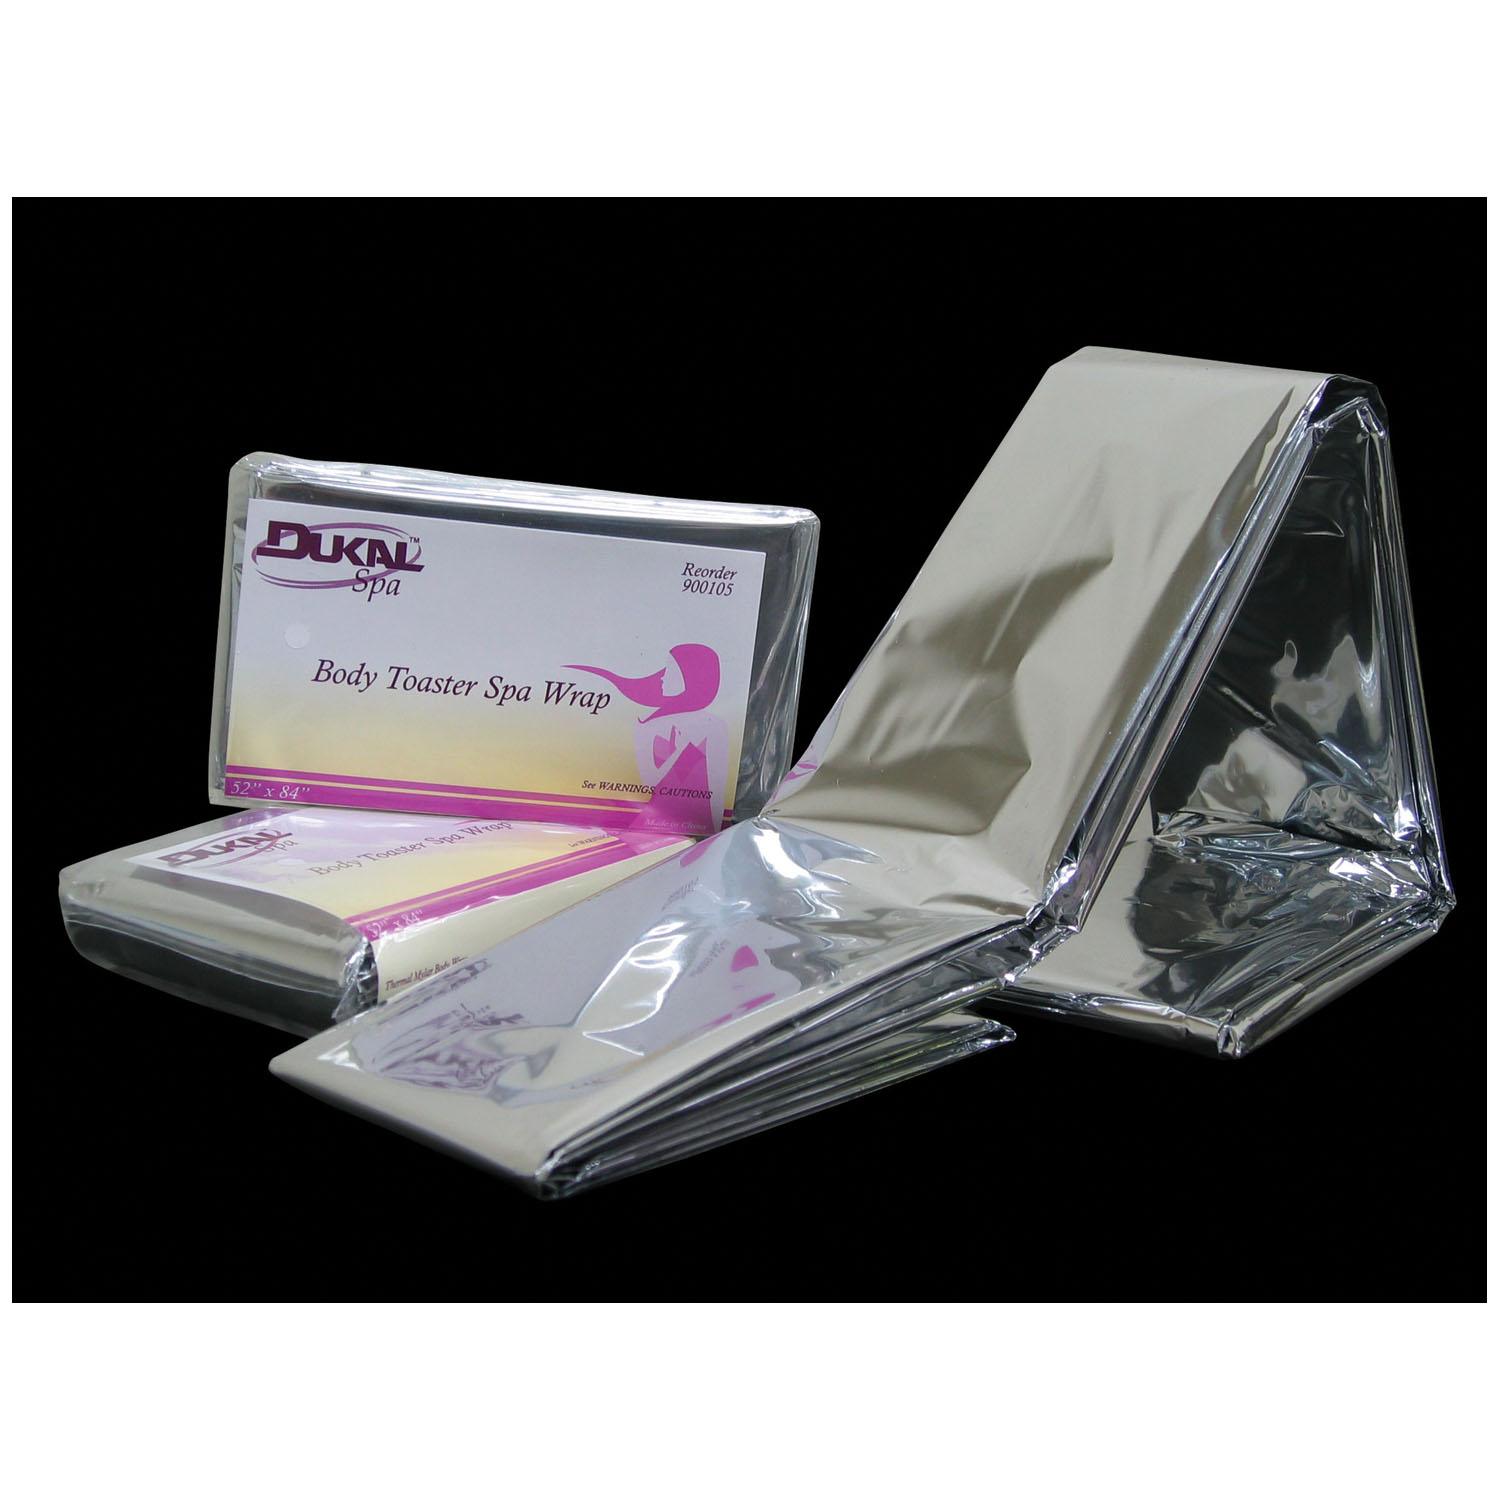 DUKAL SPA SUPPLY & SPA CARE PRODUCTS : 900105 CS $234.50 Stocked